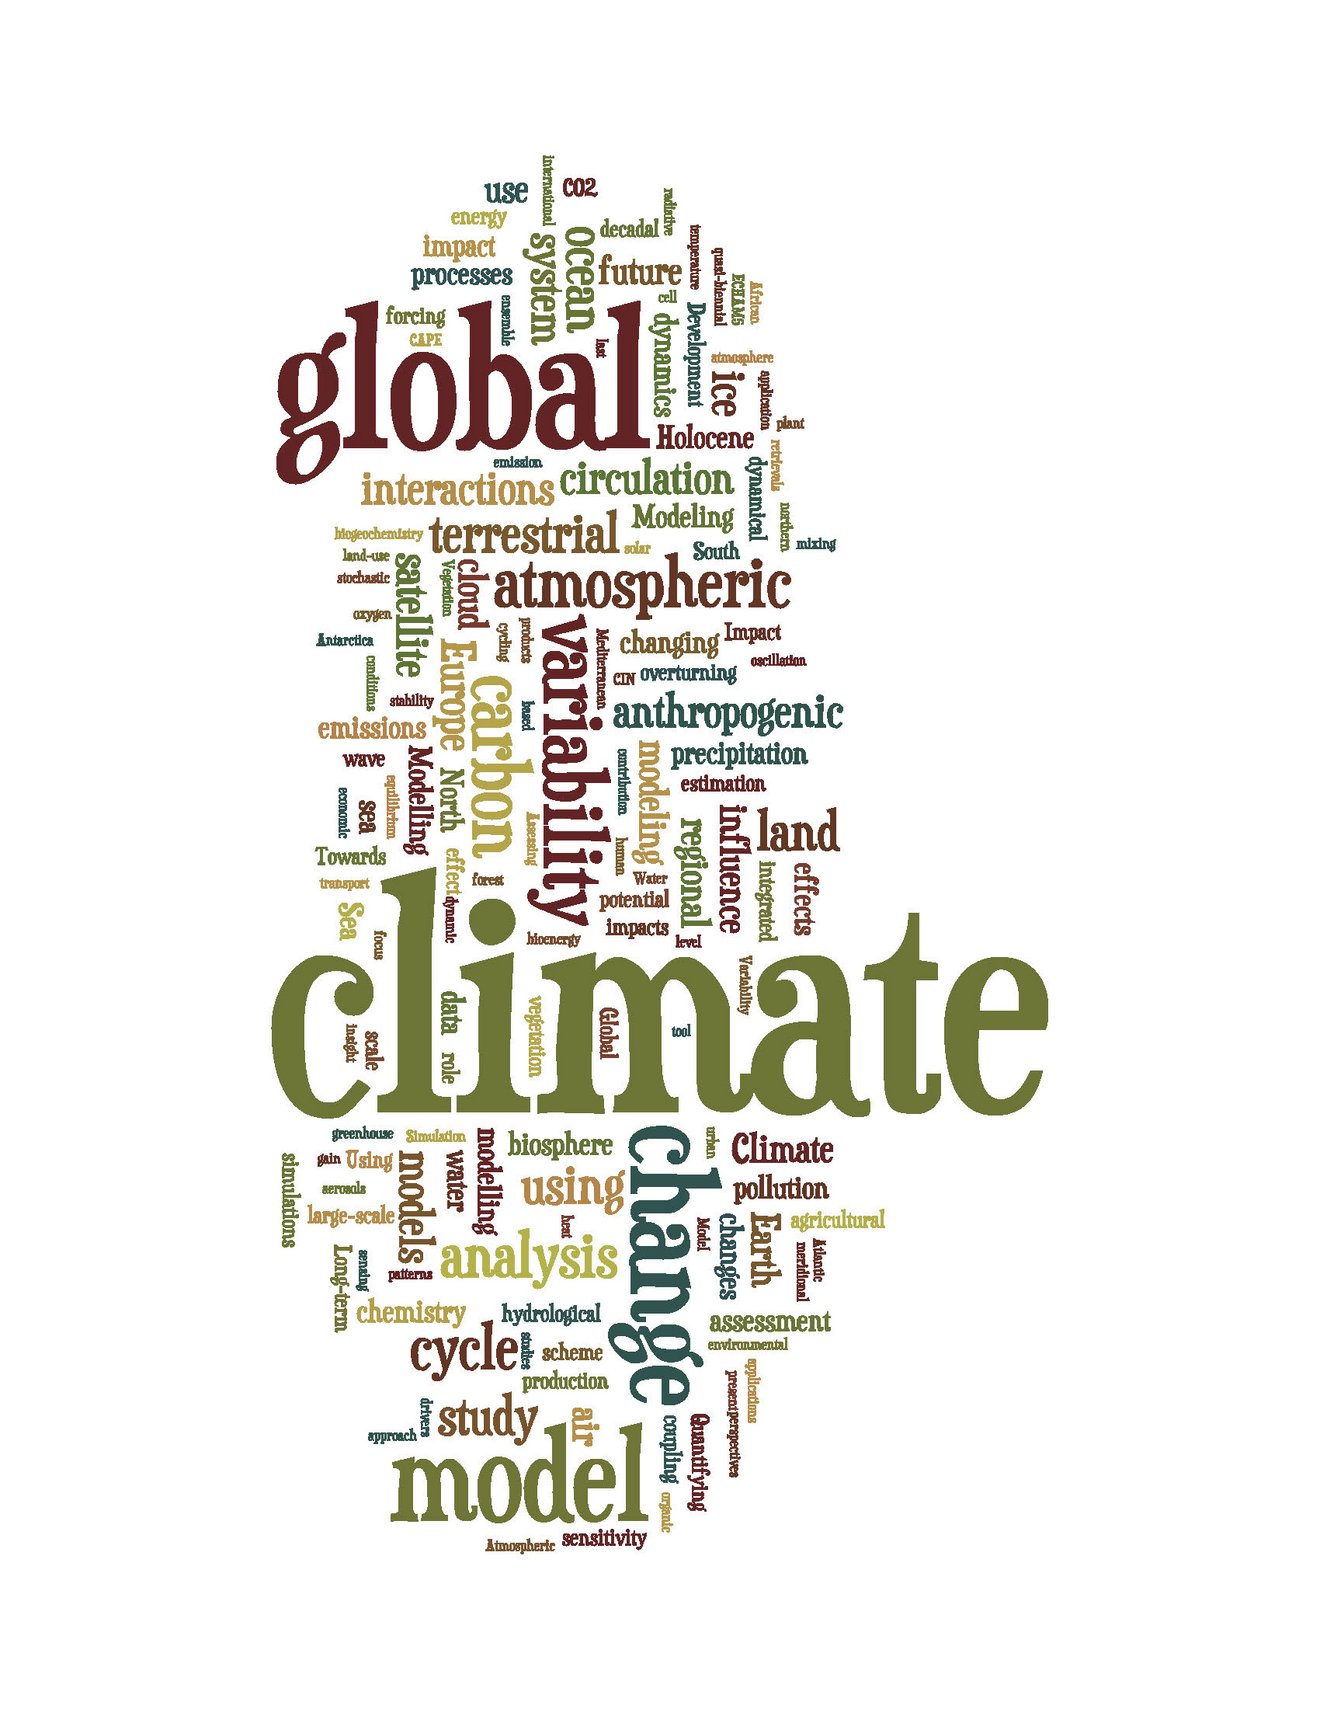 figure: wordle of climate-related terms